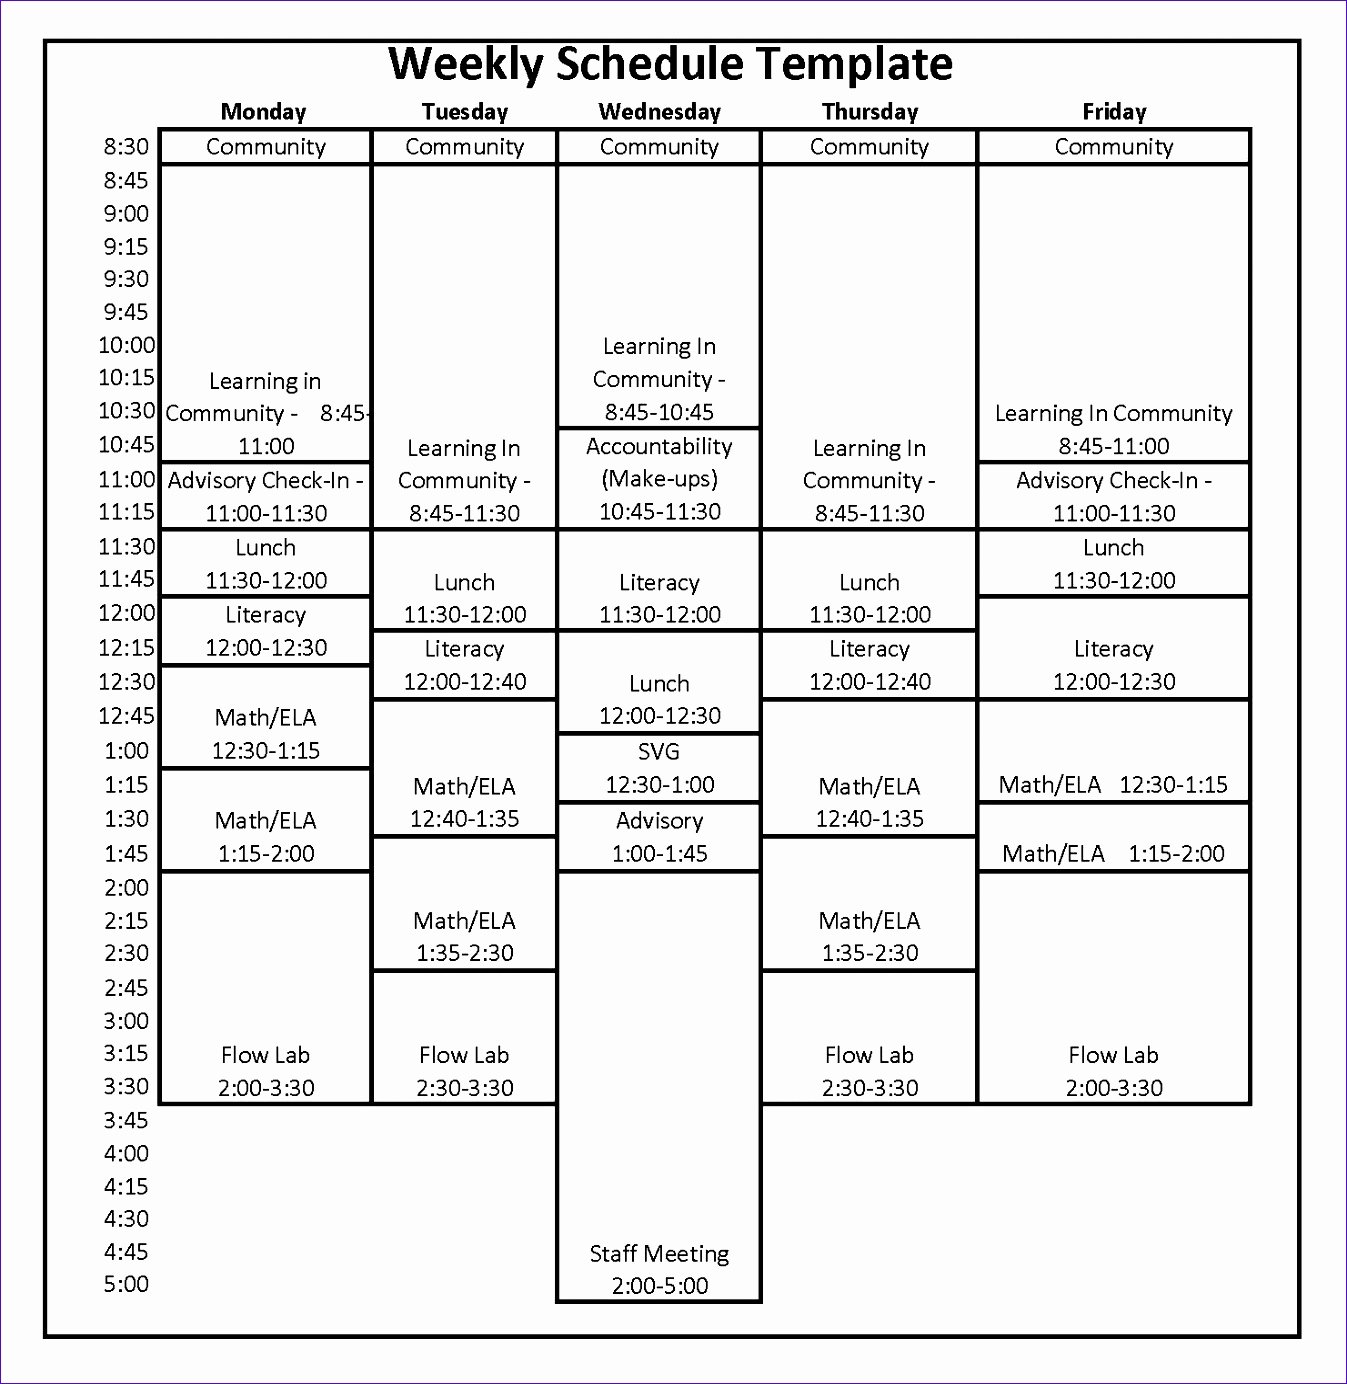 on call schedule template excel vlcnv elegant employee lunch schedule template pacq